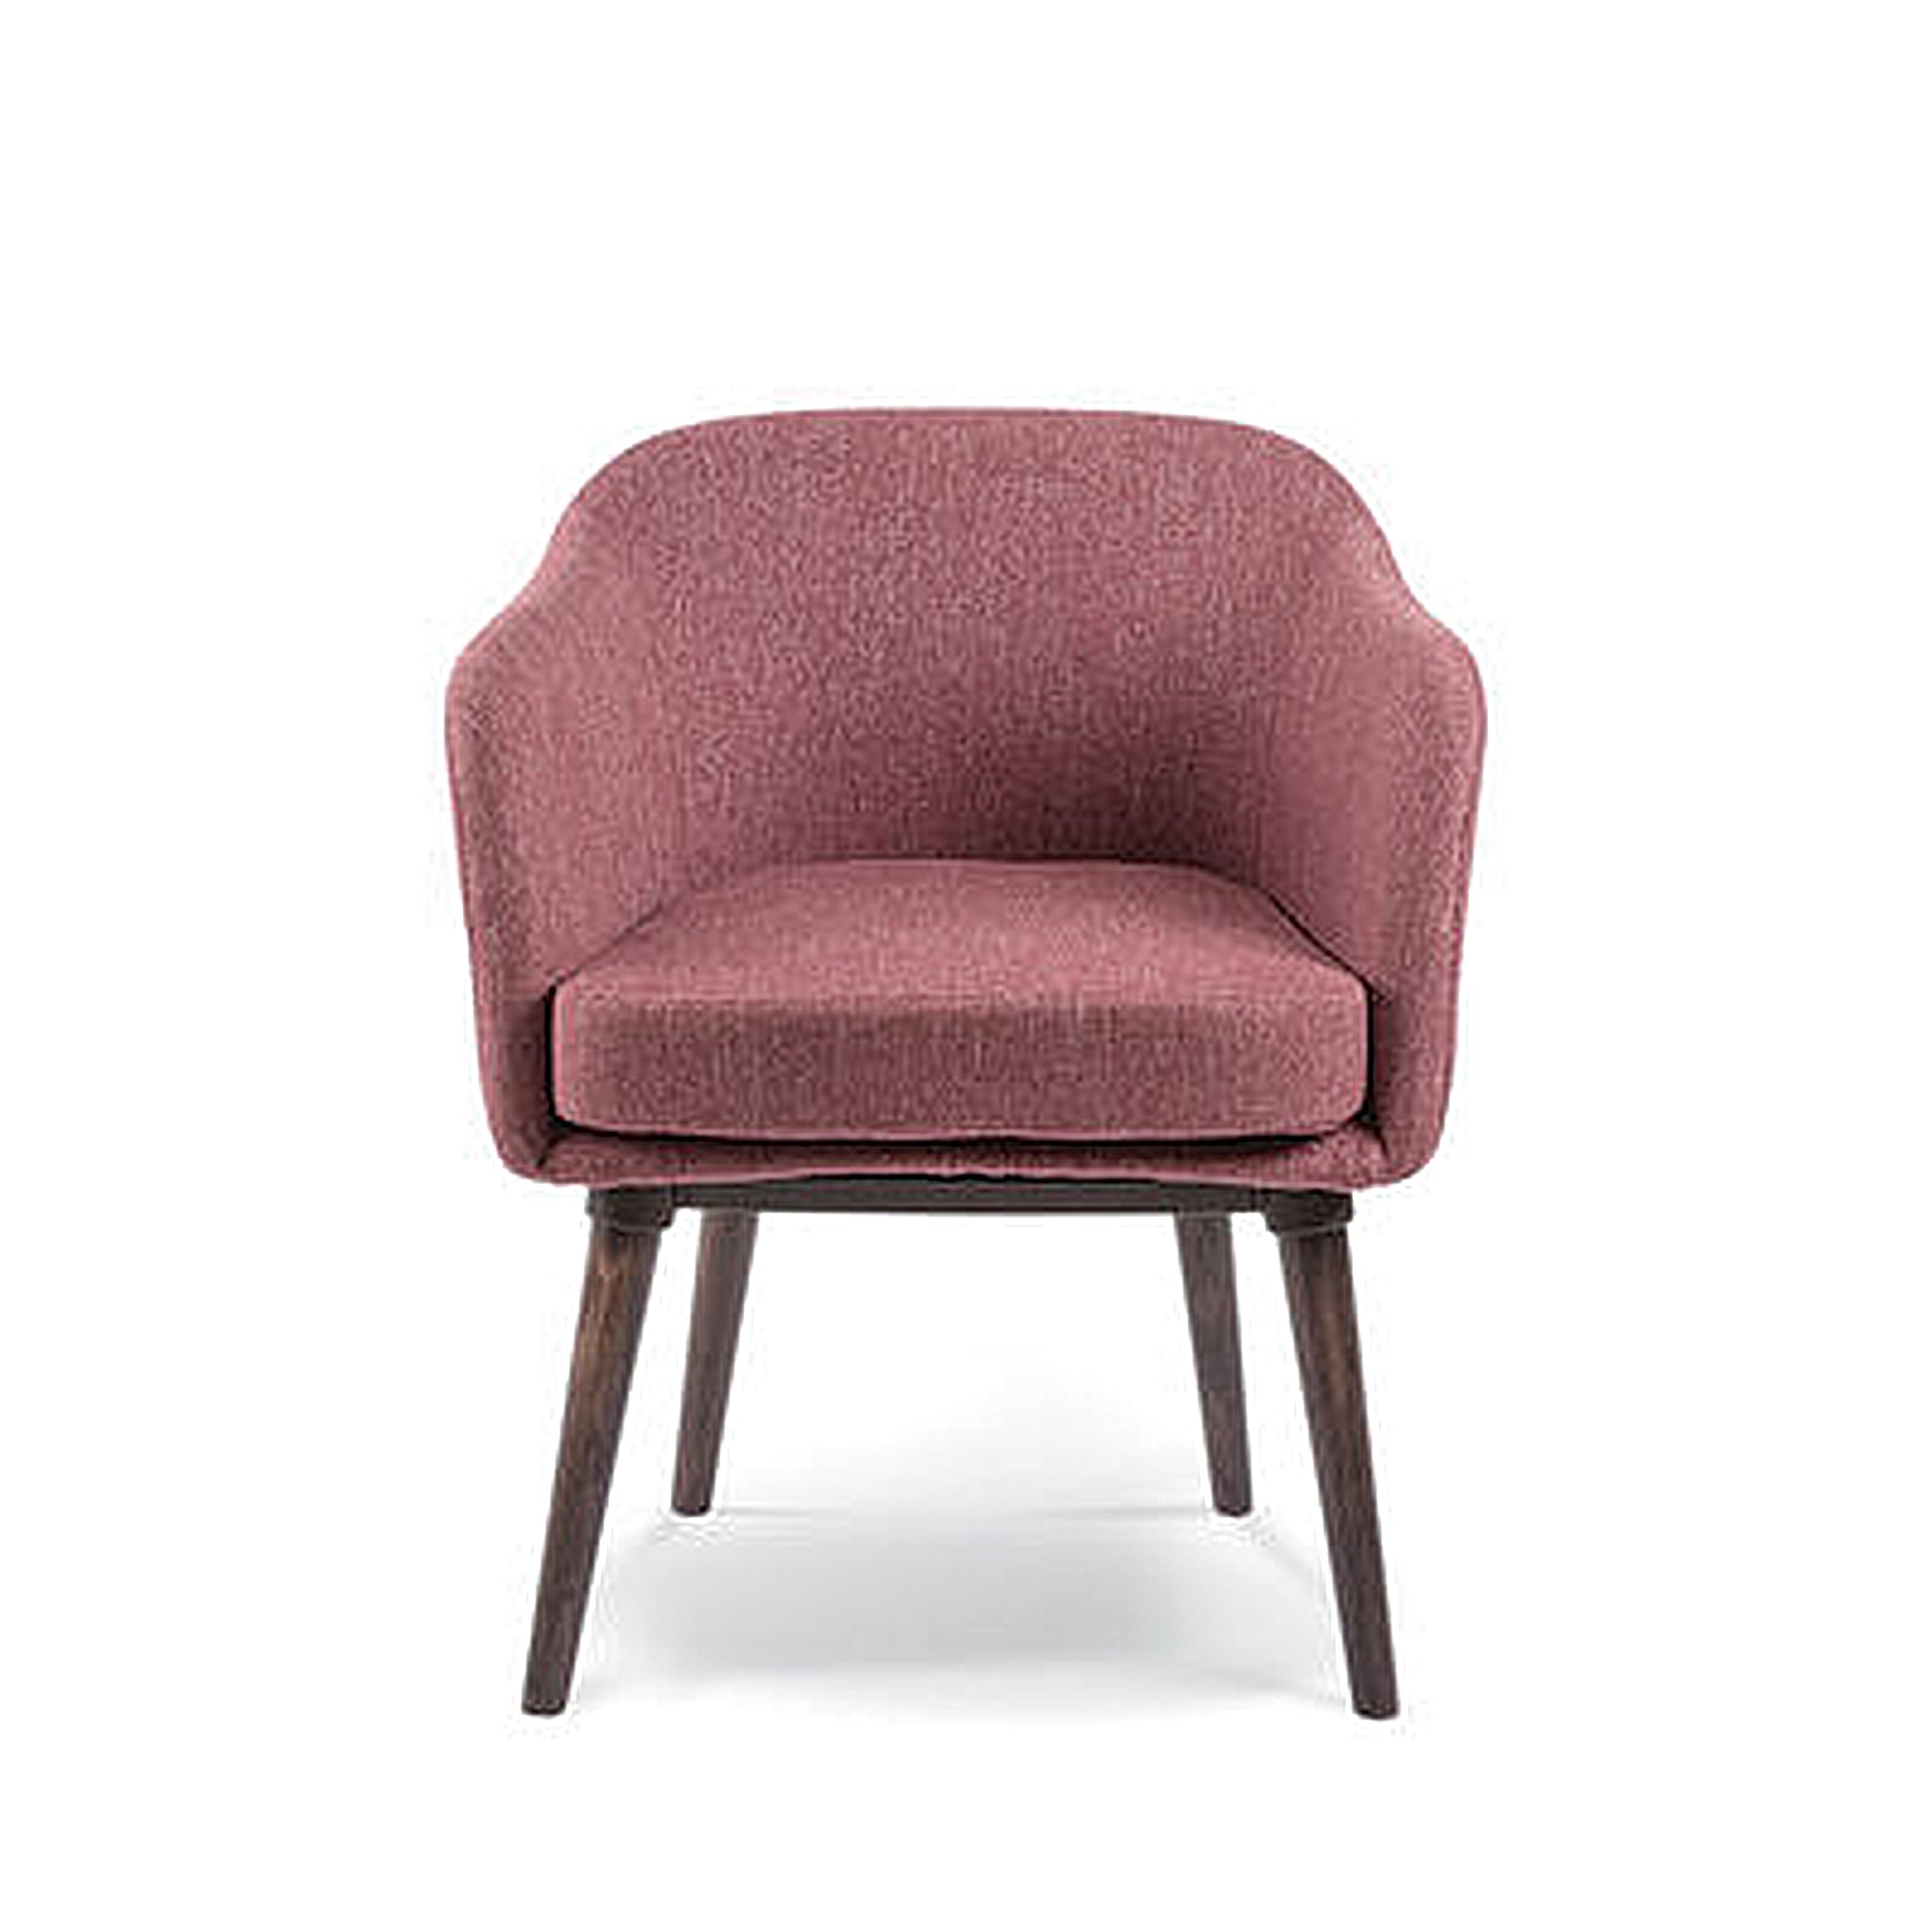 Lobby Armchair with Timber Legs or 4 Prong Leg